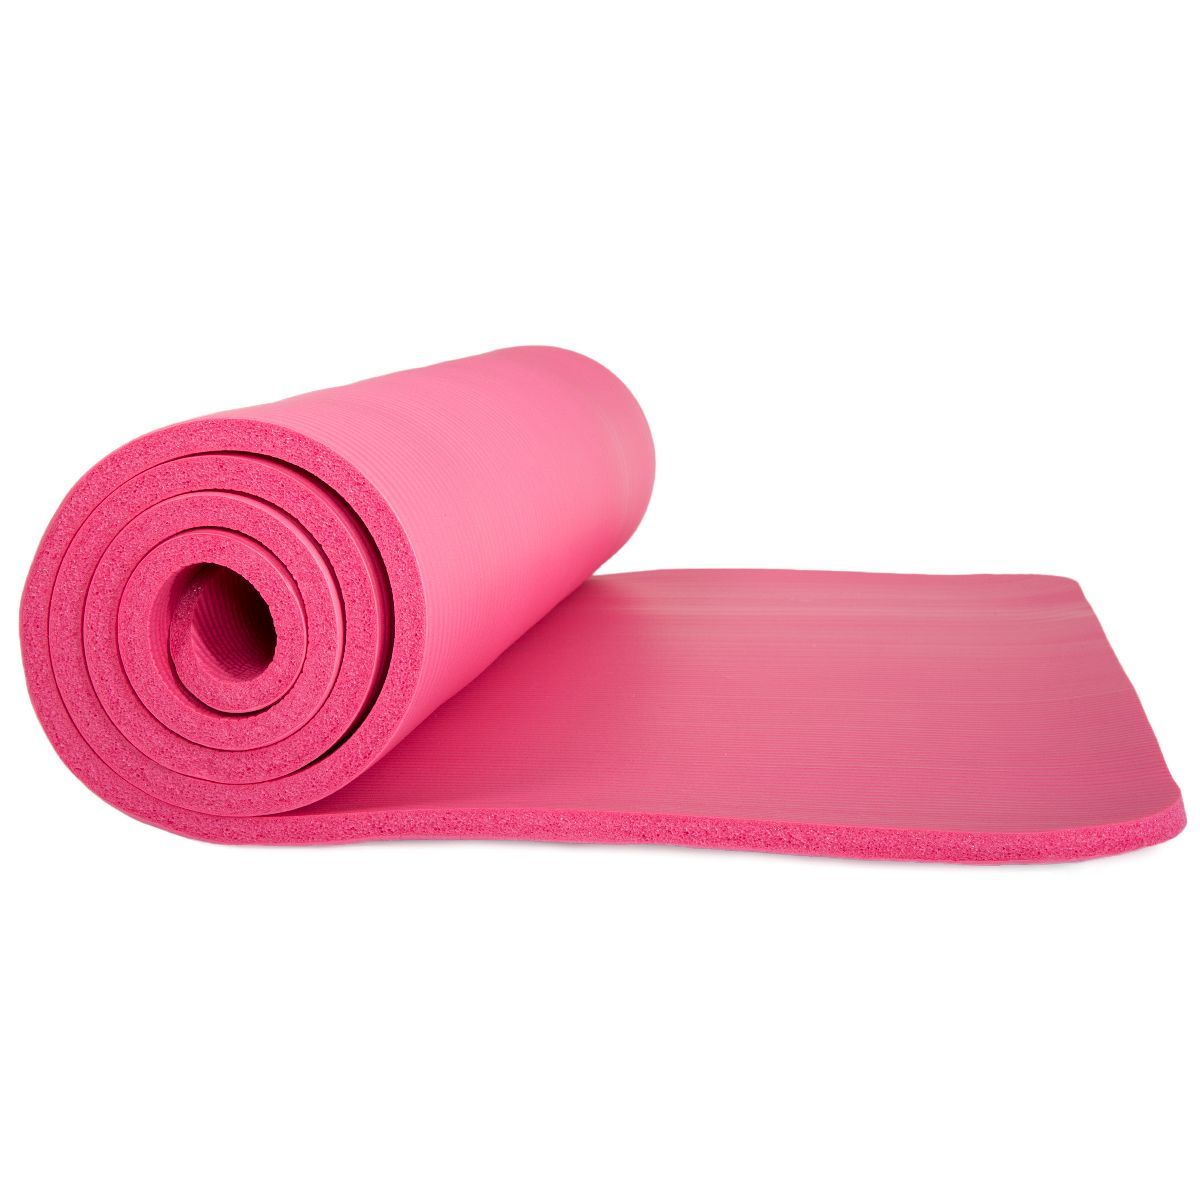 Extra Thick Yoga Mat - 0.5-Inch-Thick Durable Non-Slip Foam Workout Mat for Fitness, Pilates and ... | Target